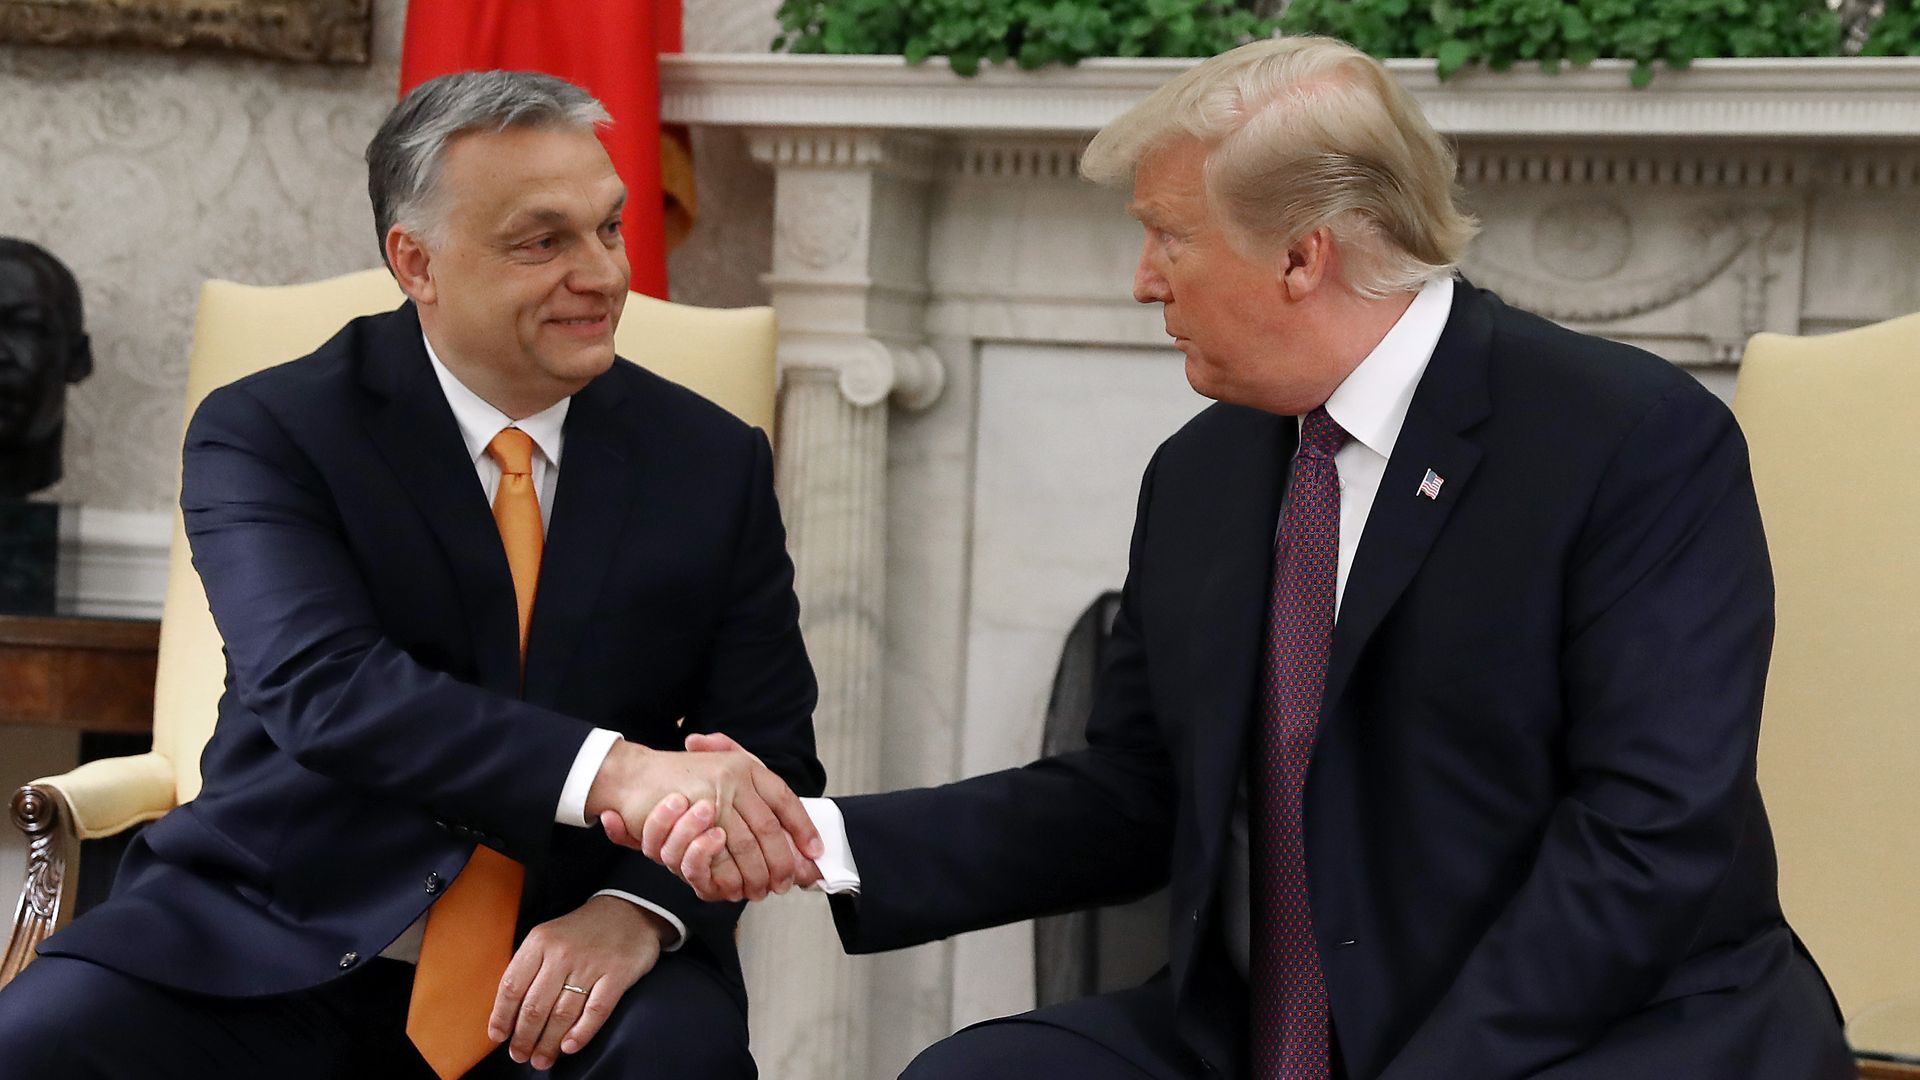 Former President Donald Trump shakes hands with Hungarian Prime Minister Viktor Orban on May 13, 2019.